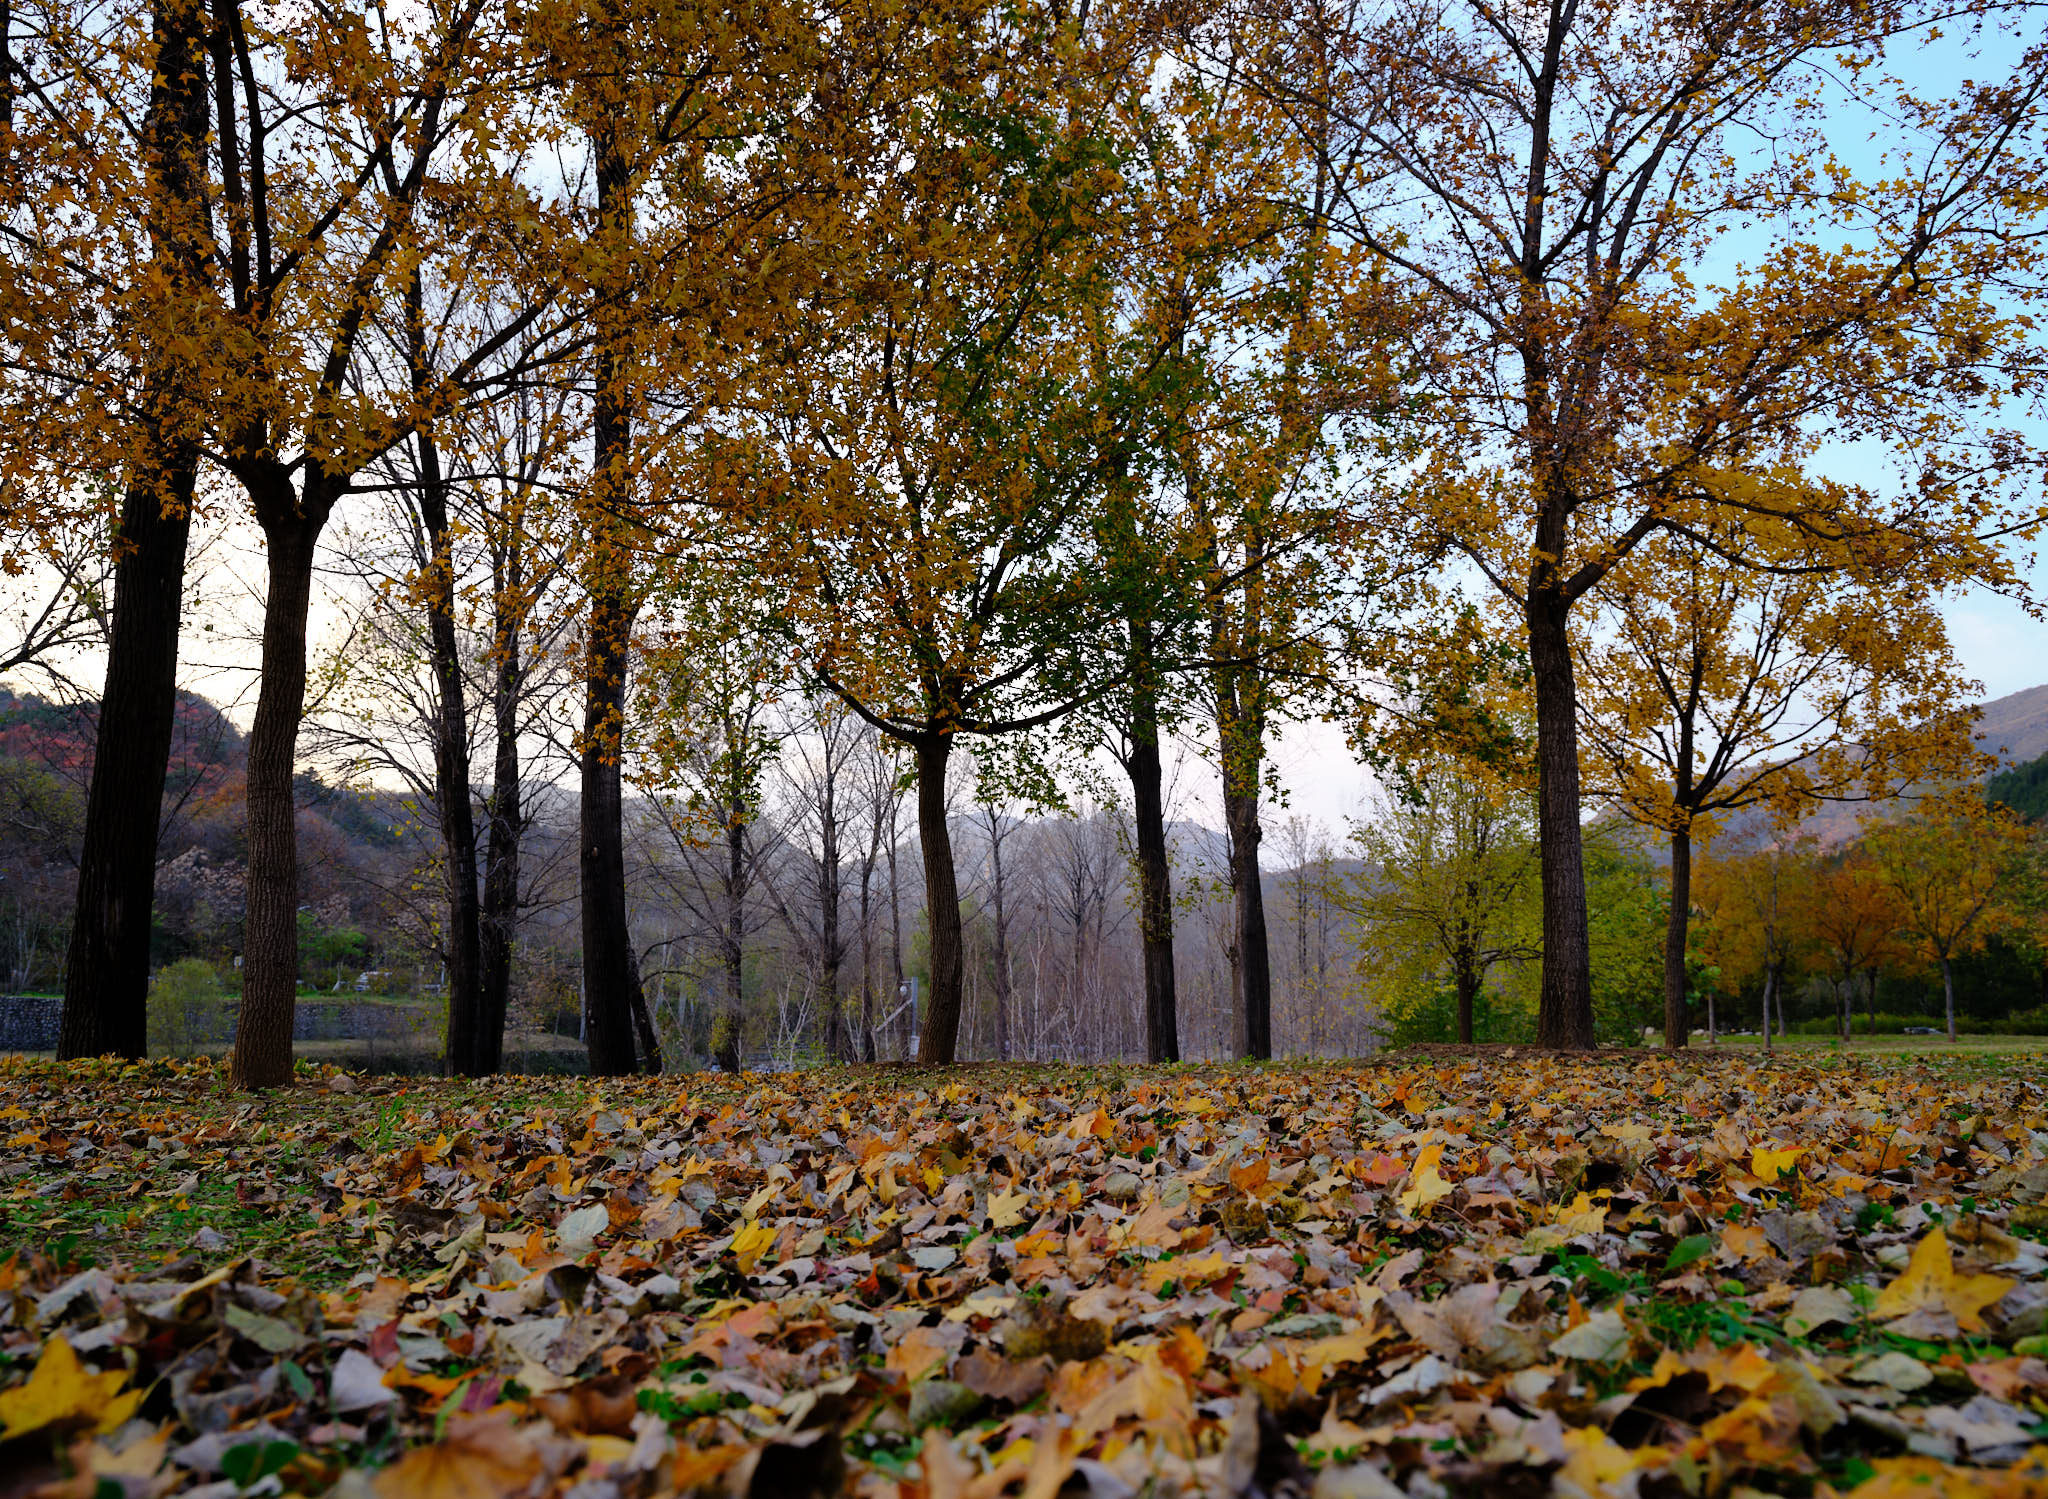 Autumn leaves in foreground with trees in background in Yanqi Lake district of Beijing